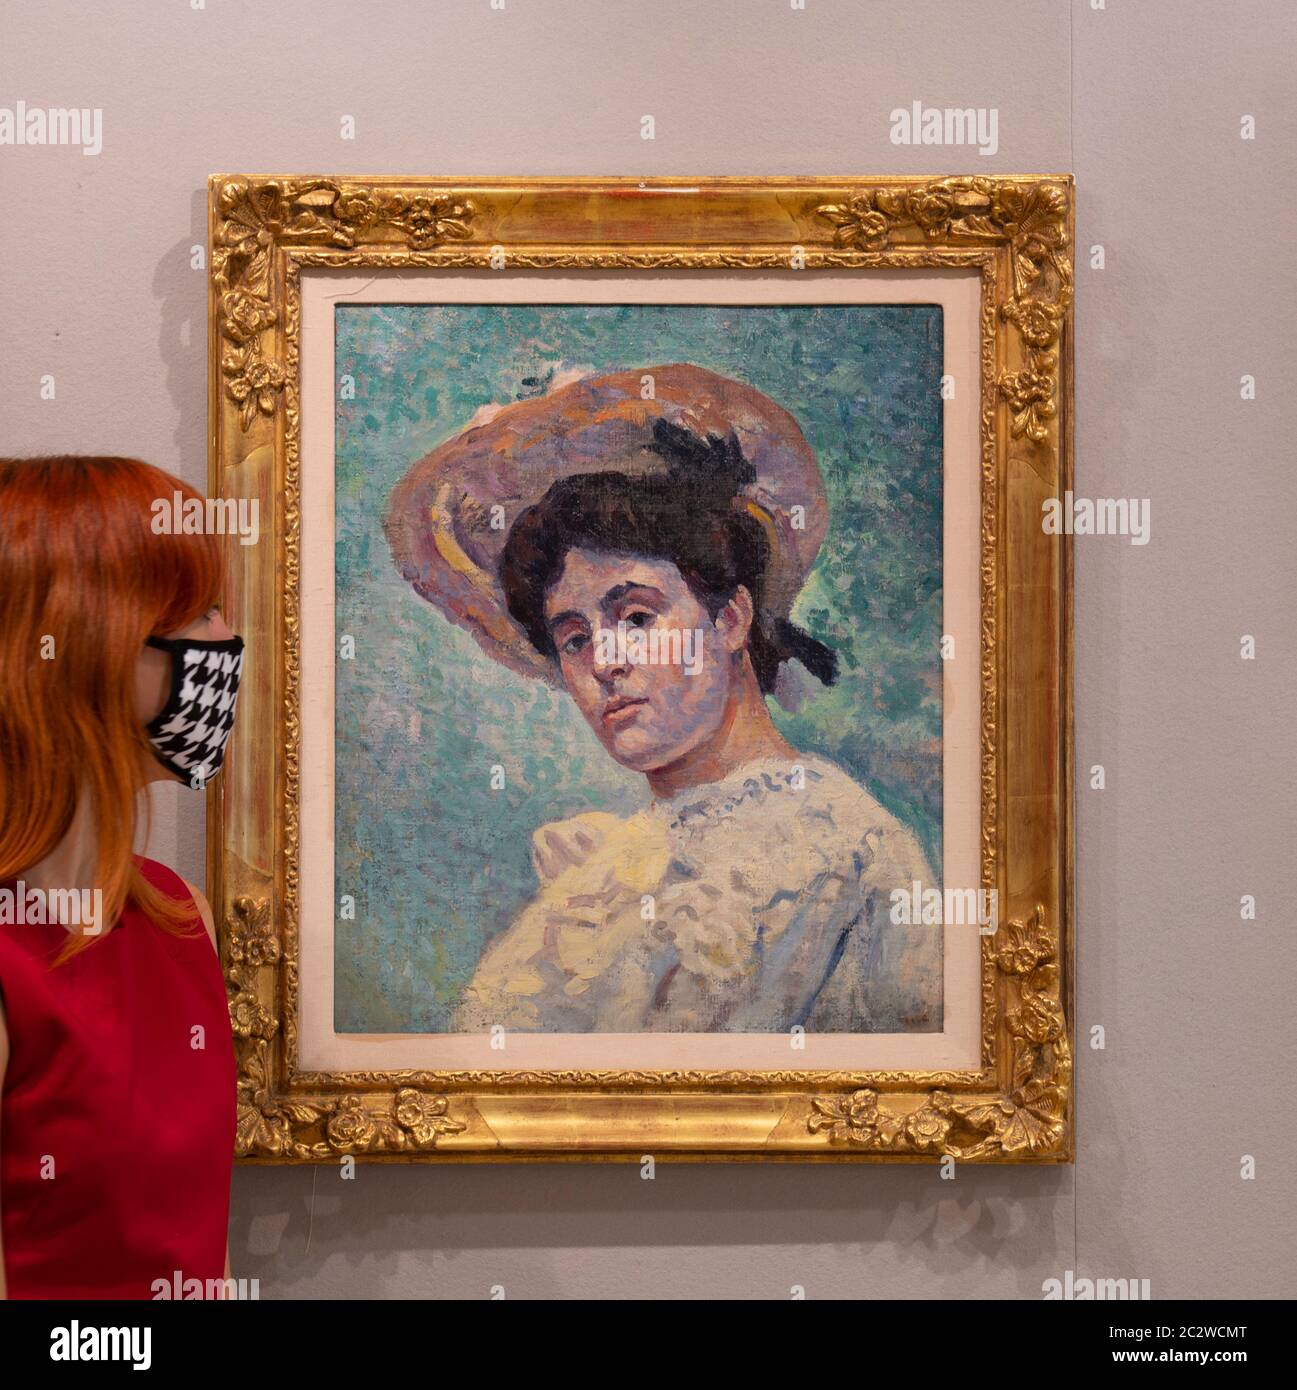 Bonhams, New Bond Street, London, UK. 18th June 2020. Bonhams Modern and Contemporary Art sale preview,  with viewings by timed appointment. The sale will be held on 23 June. Image: Bonhams staff view Maximilien Luce (1858-1941). Portrait of Philiberte Givort, 1906. Estimate £7,000-10,000. Credit: Malcolm Park/Alamy Live News. Stock Photo